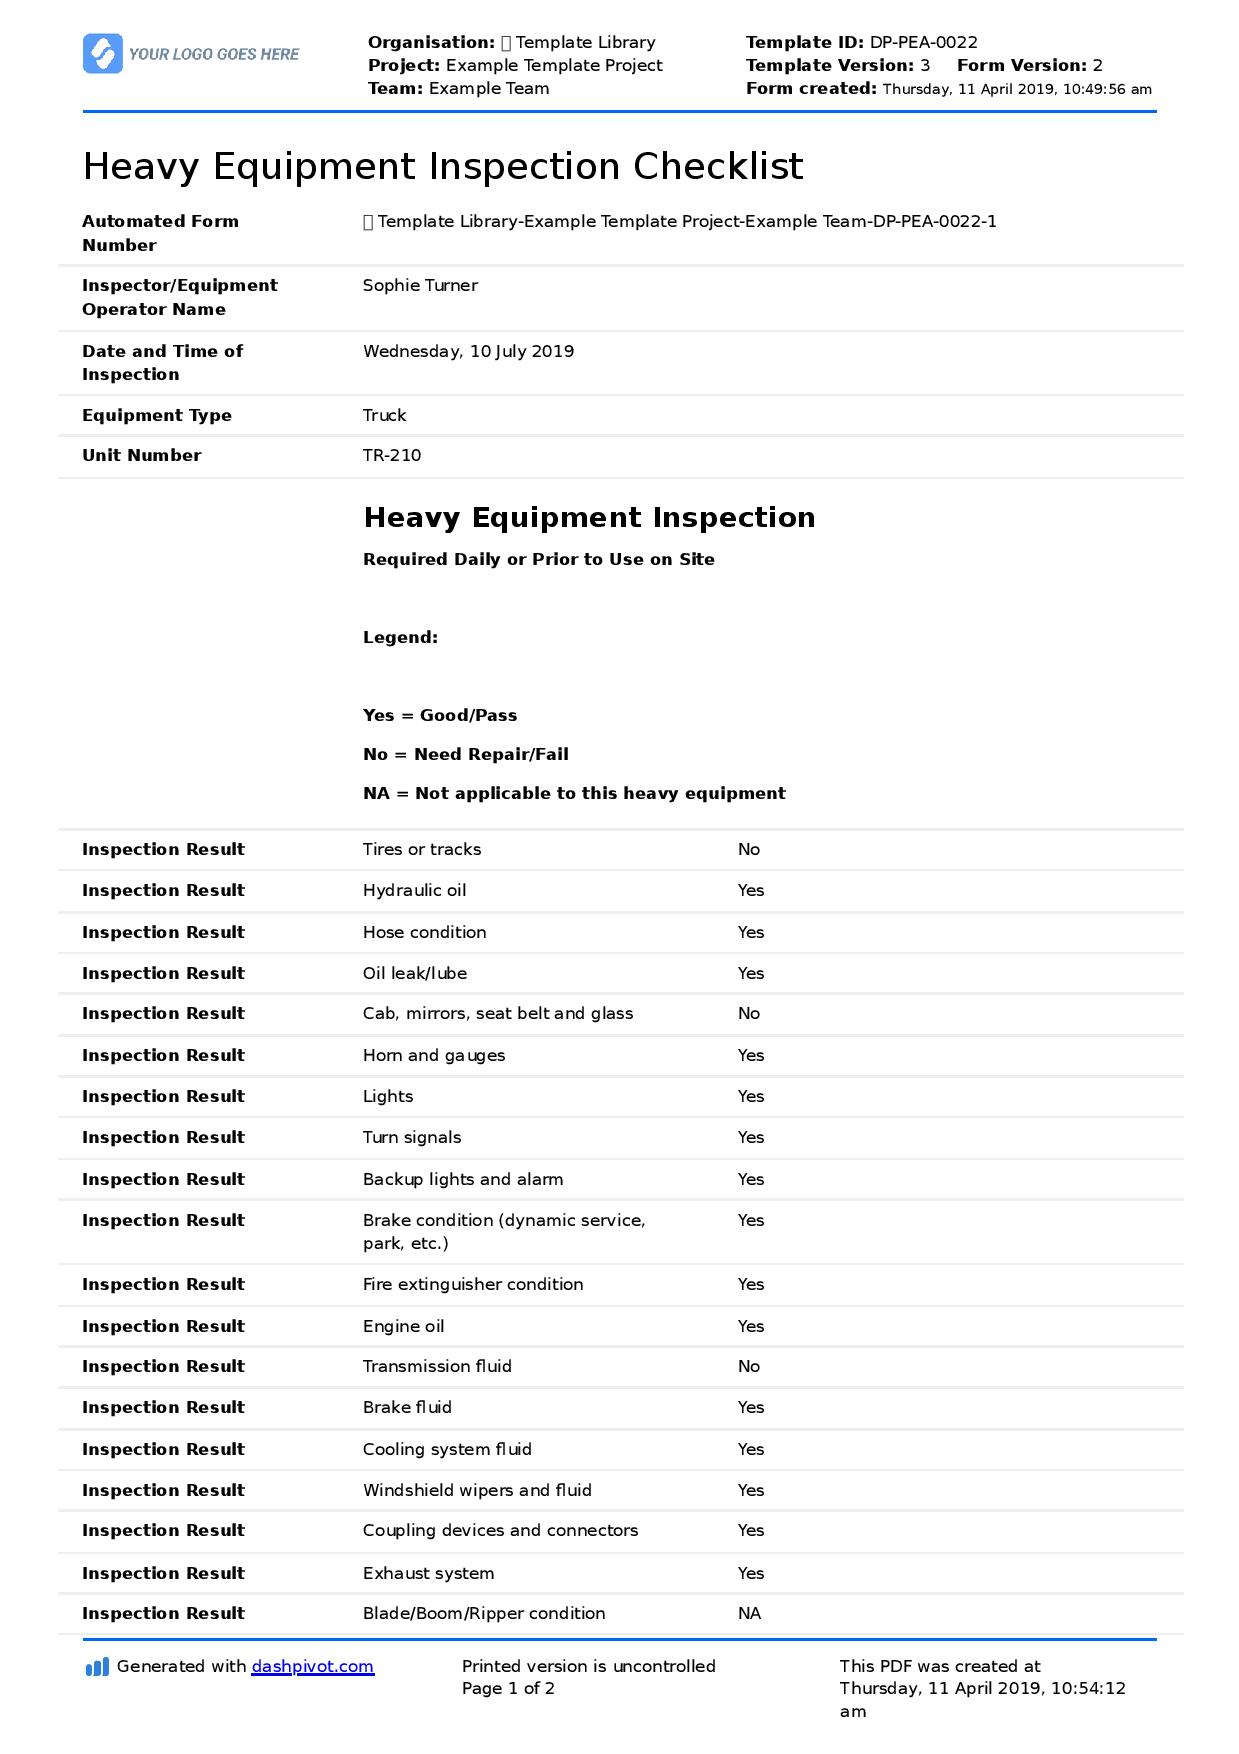 Heavy Equipment Inspection Checklist template (Free editable form) In Machine Shop Inspection Report Template